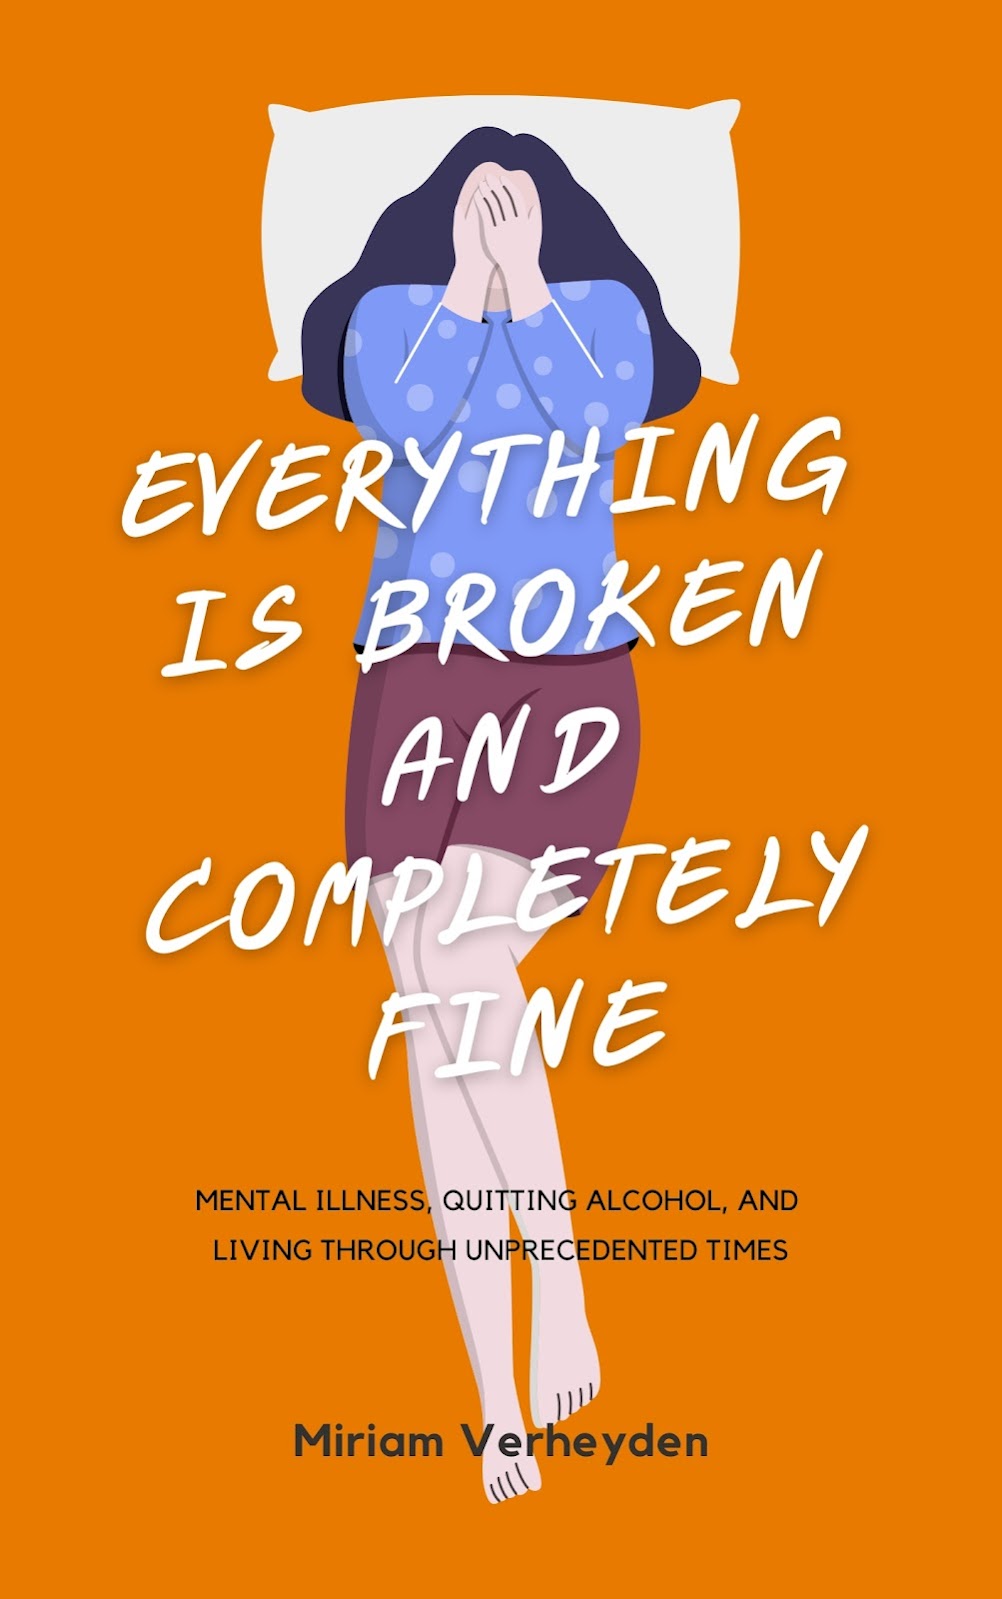 My new book: living with mental illness